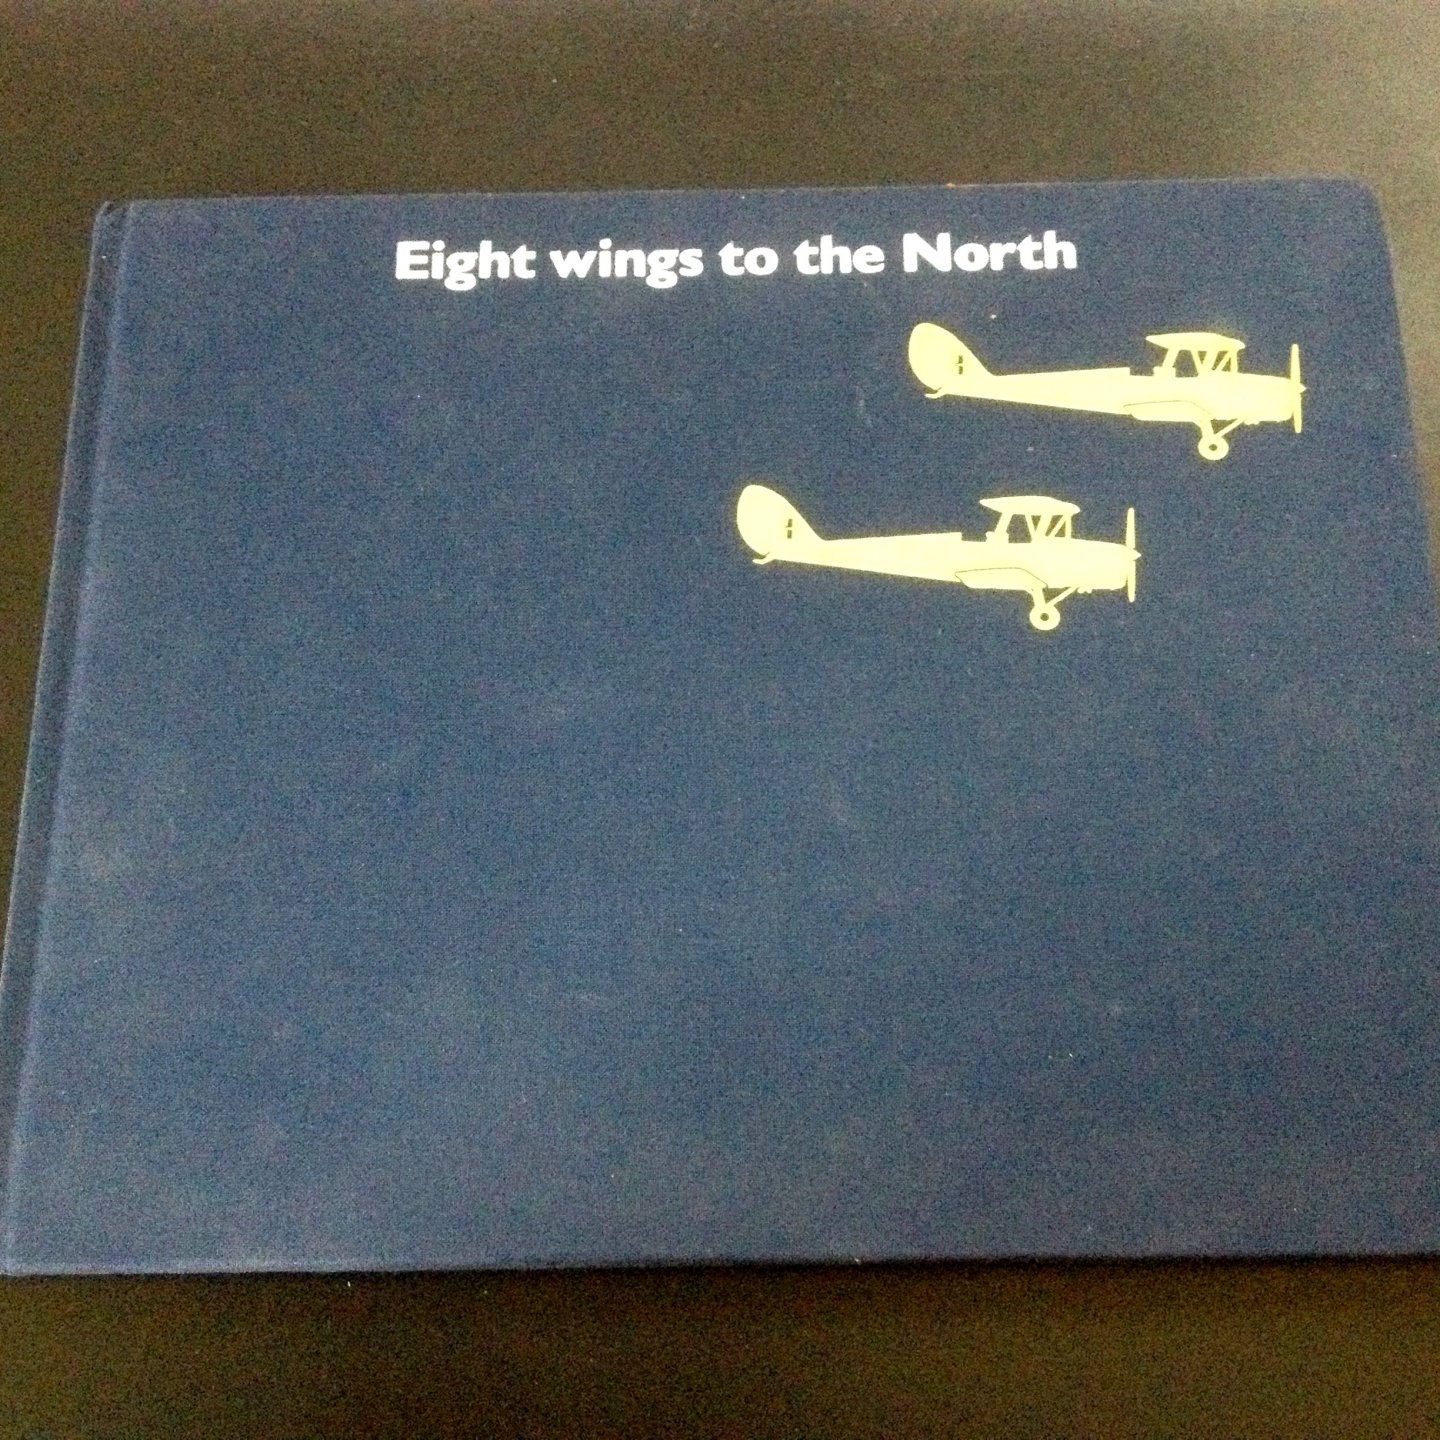 Elwes,J.,Vaisey,M. - Eight wings  to the north